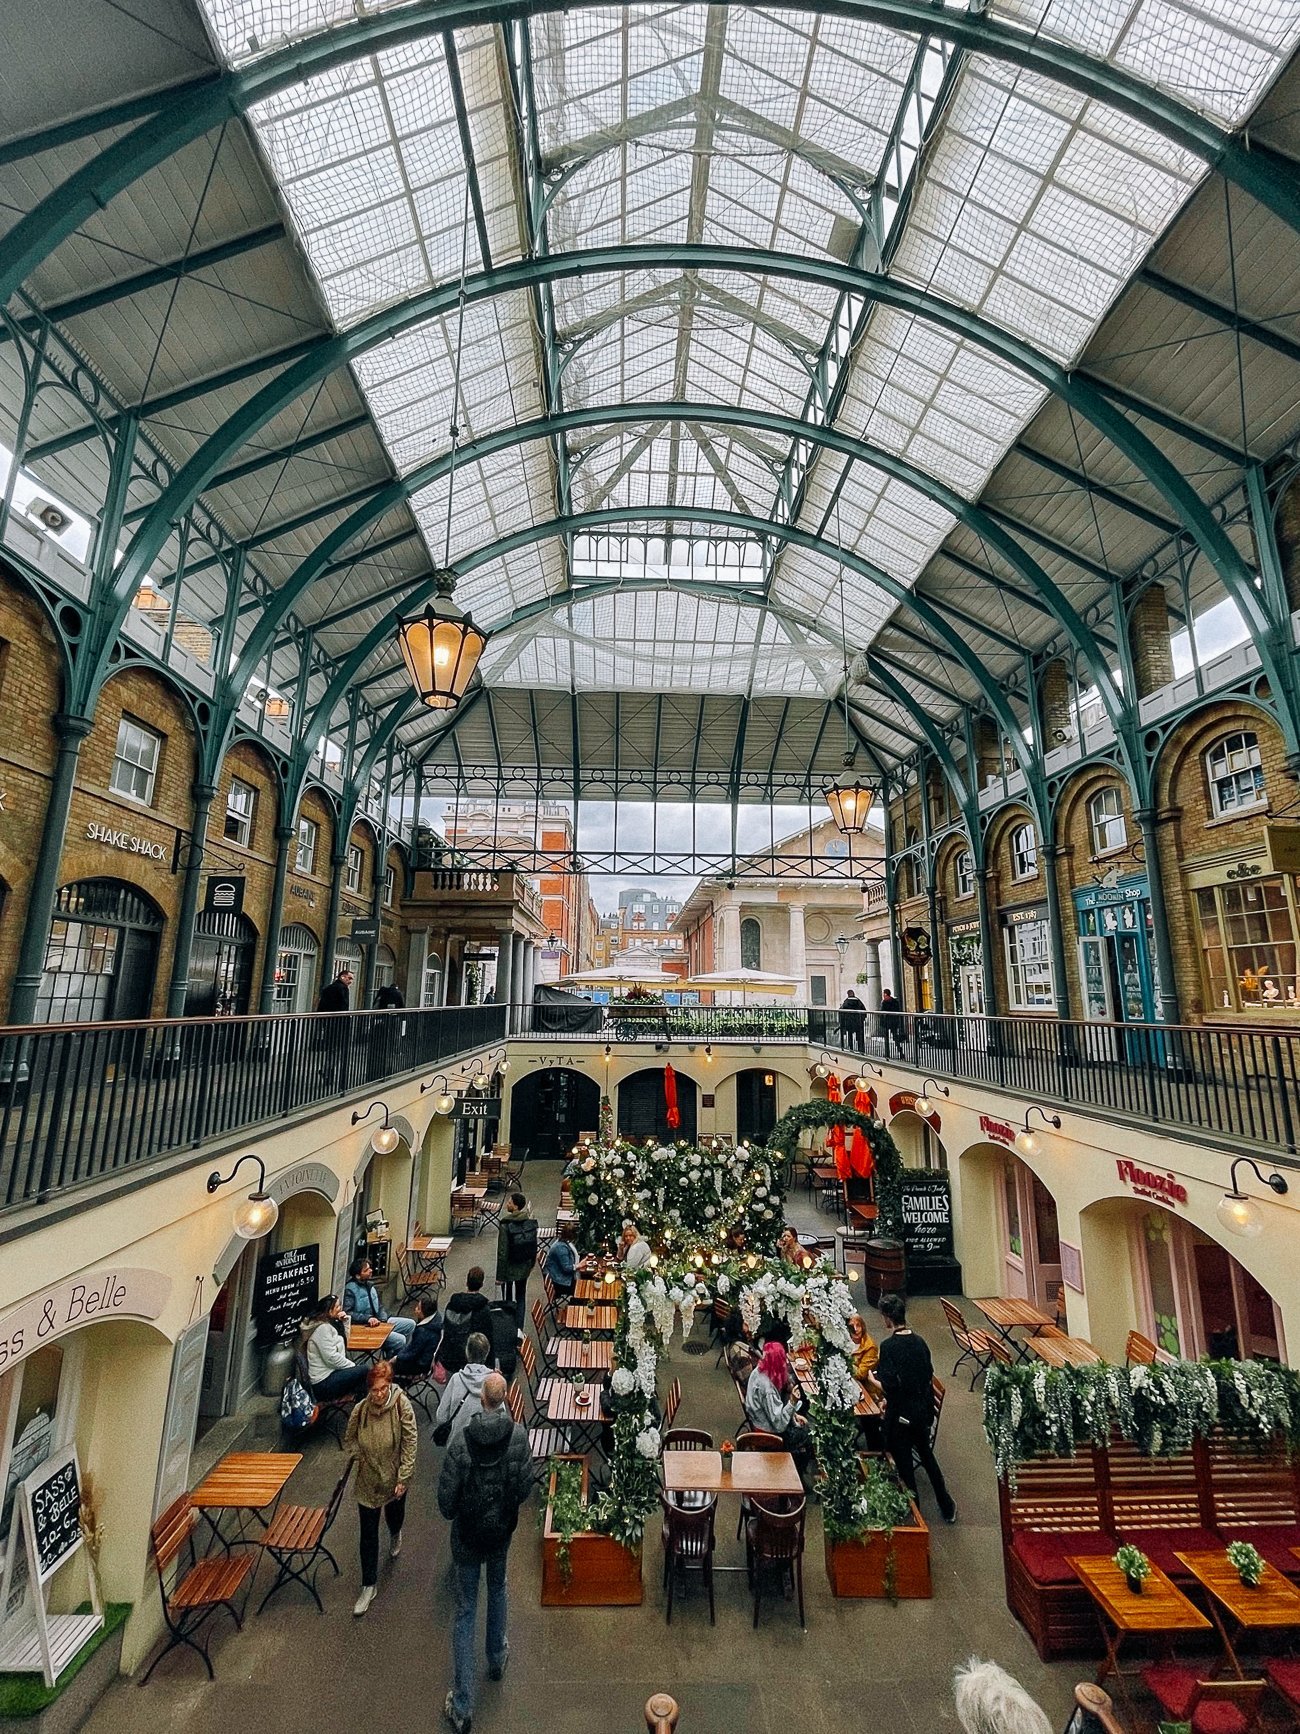 Covent Garden old apple market with arched vaulted ceilings 